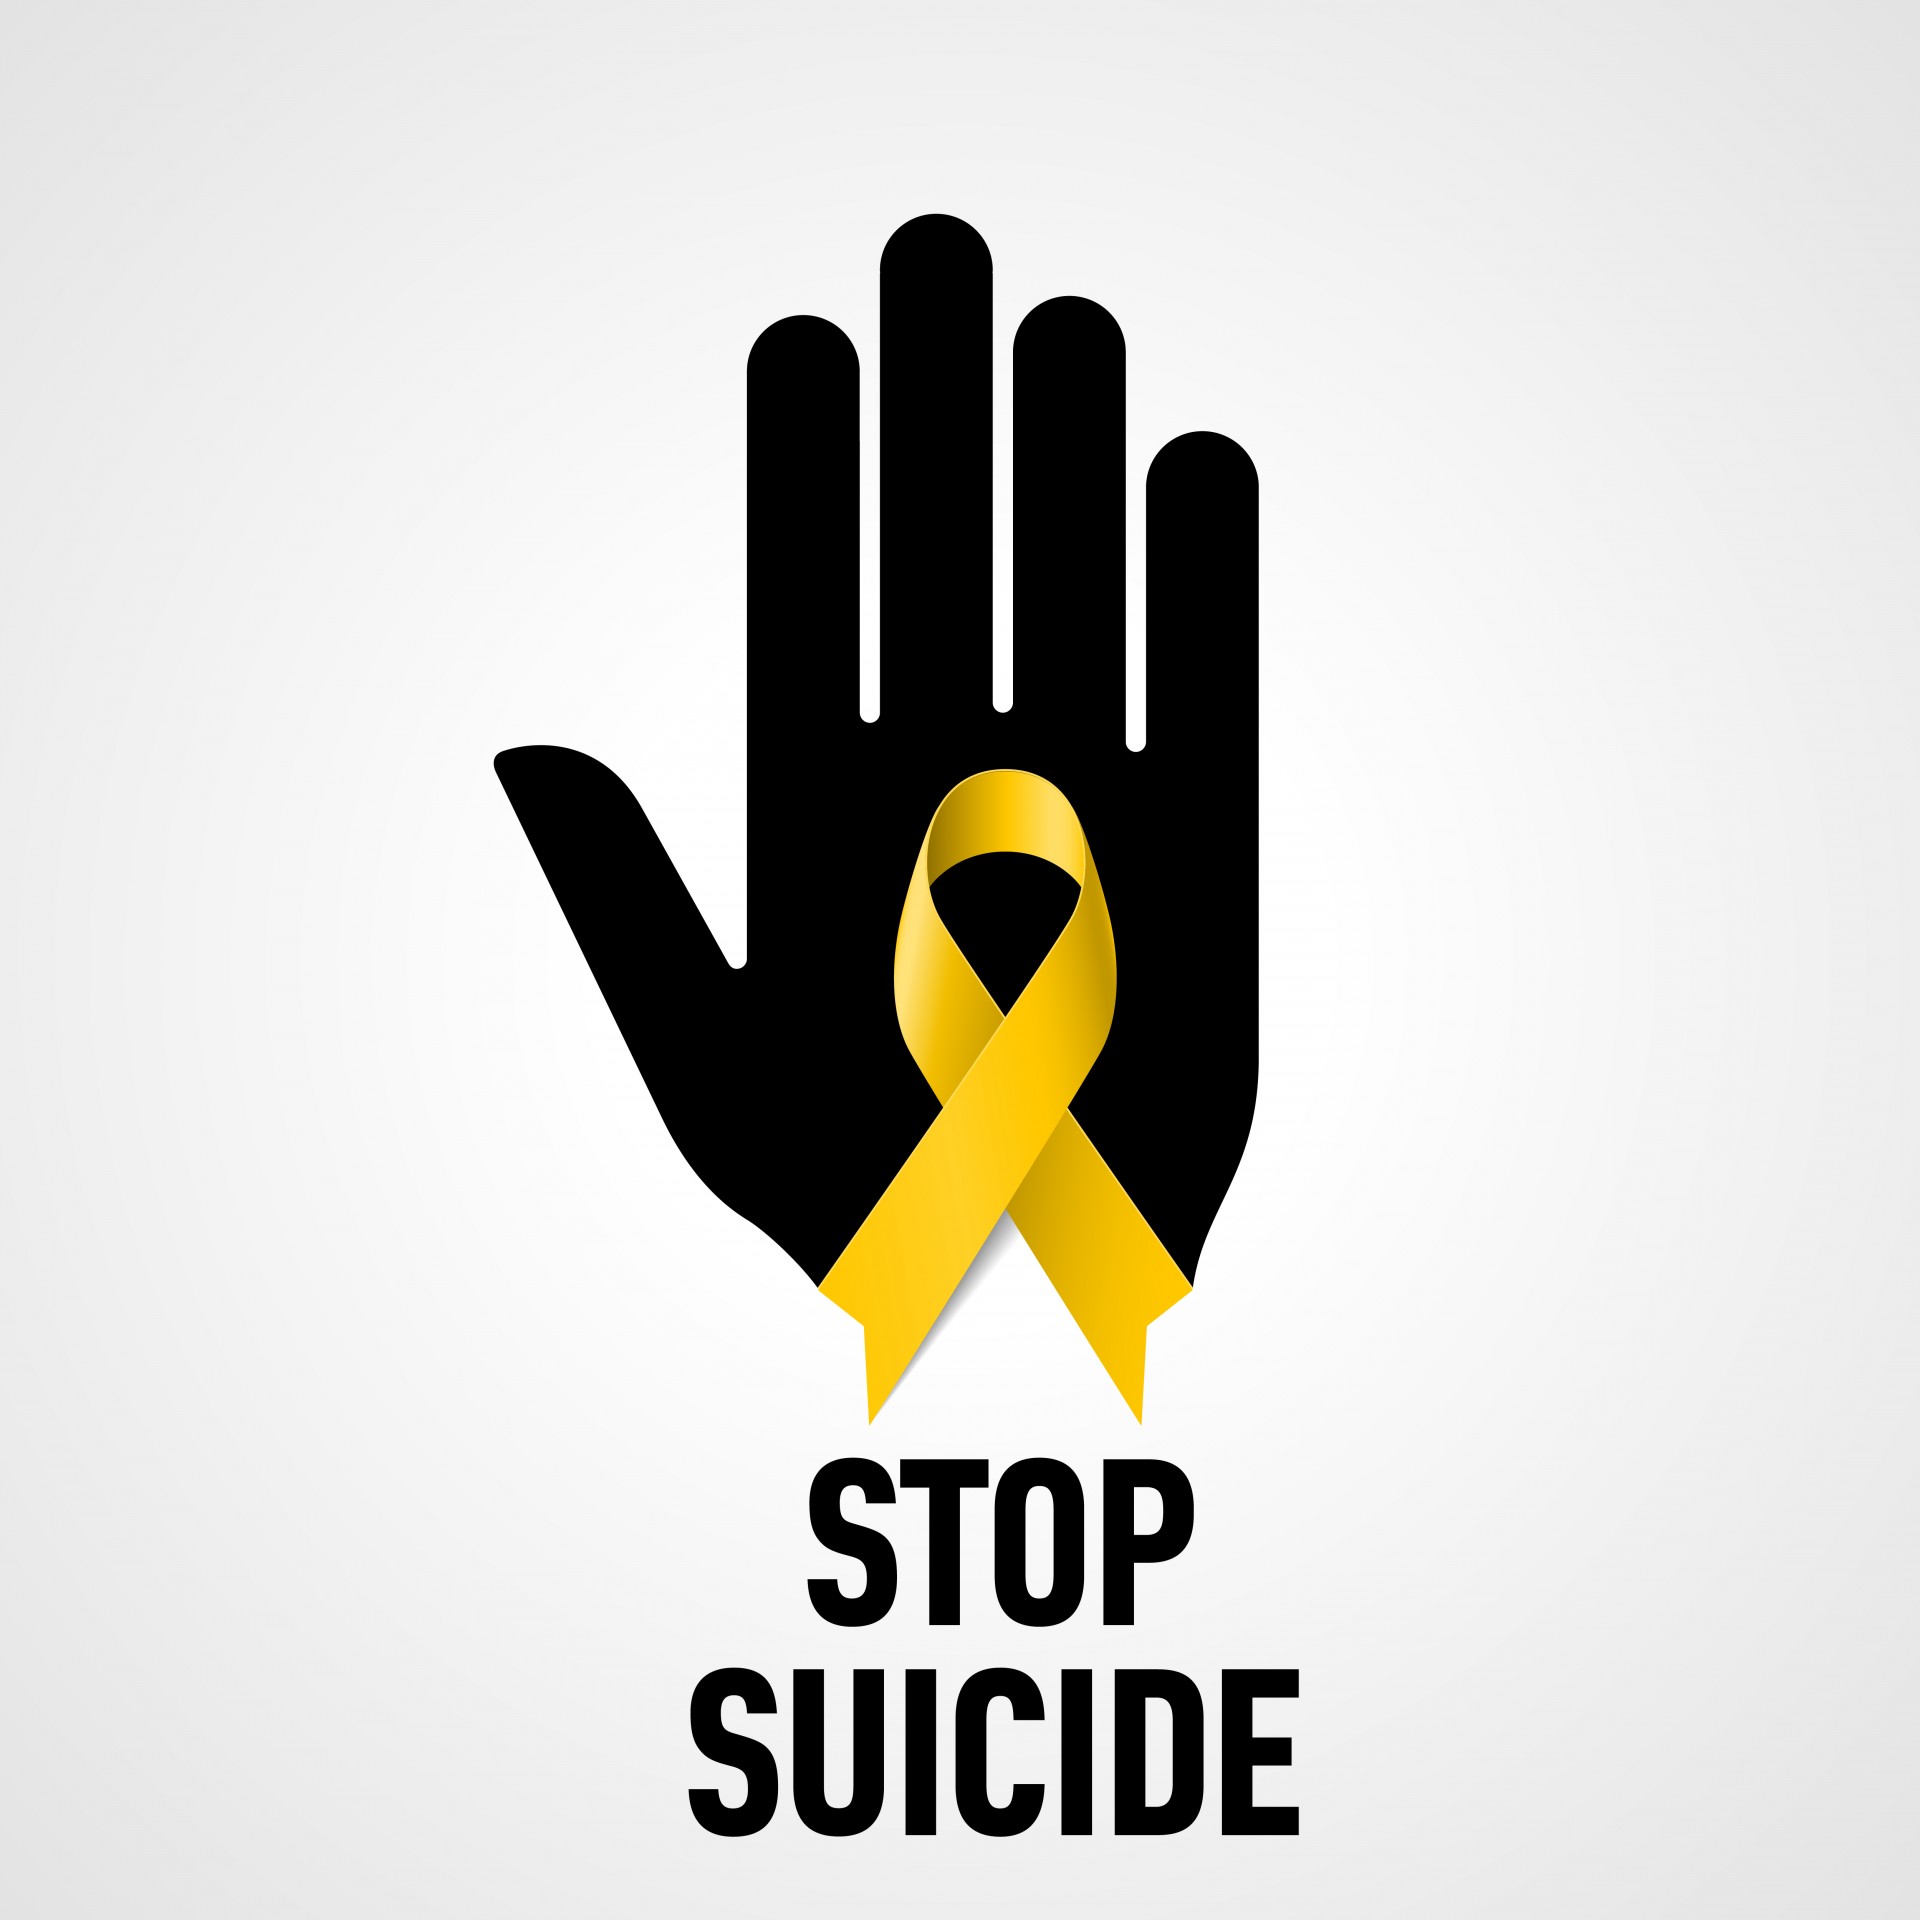 https://www.tomsguide.com/us/suicide-prevention-apps,review-2397.html